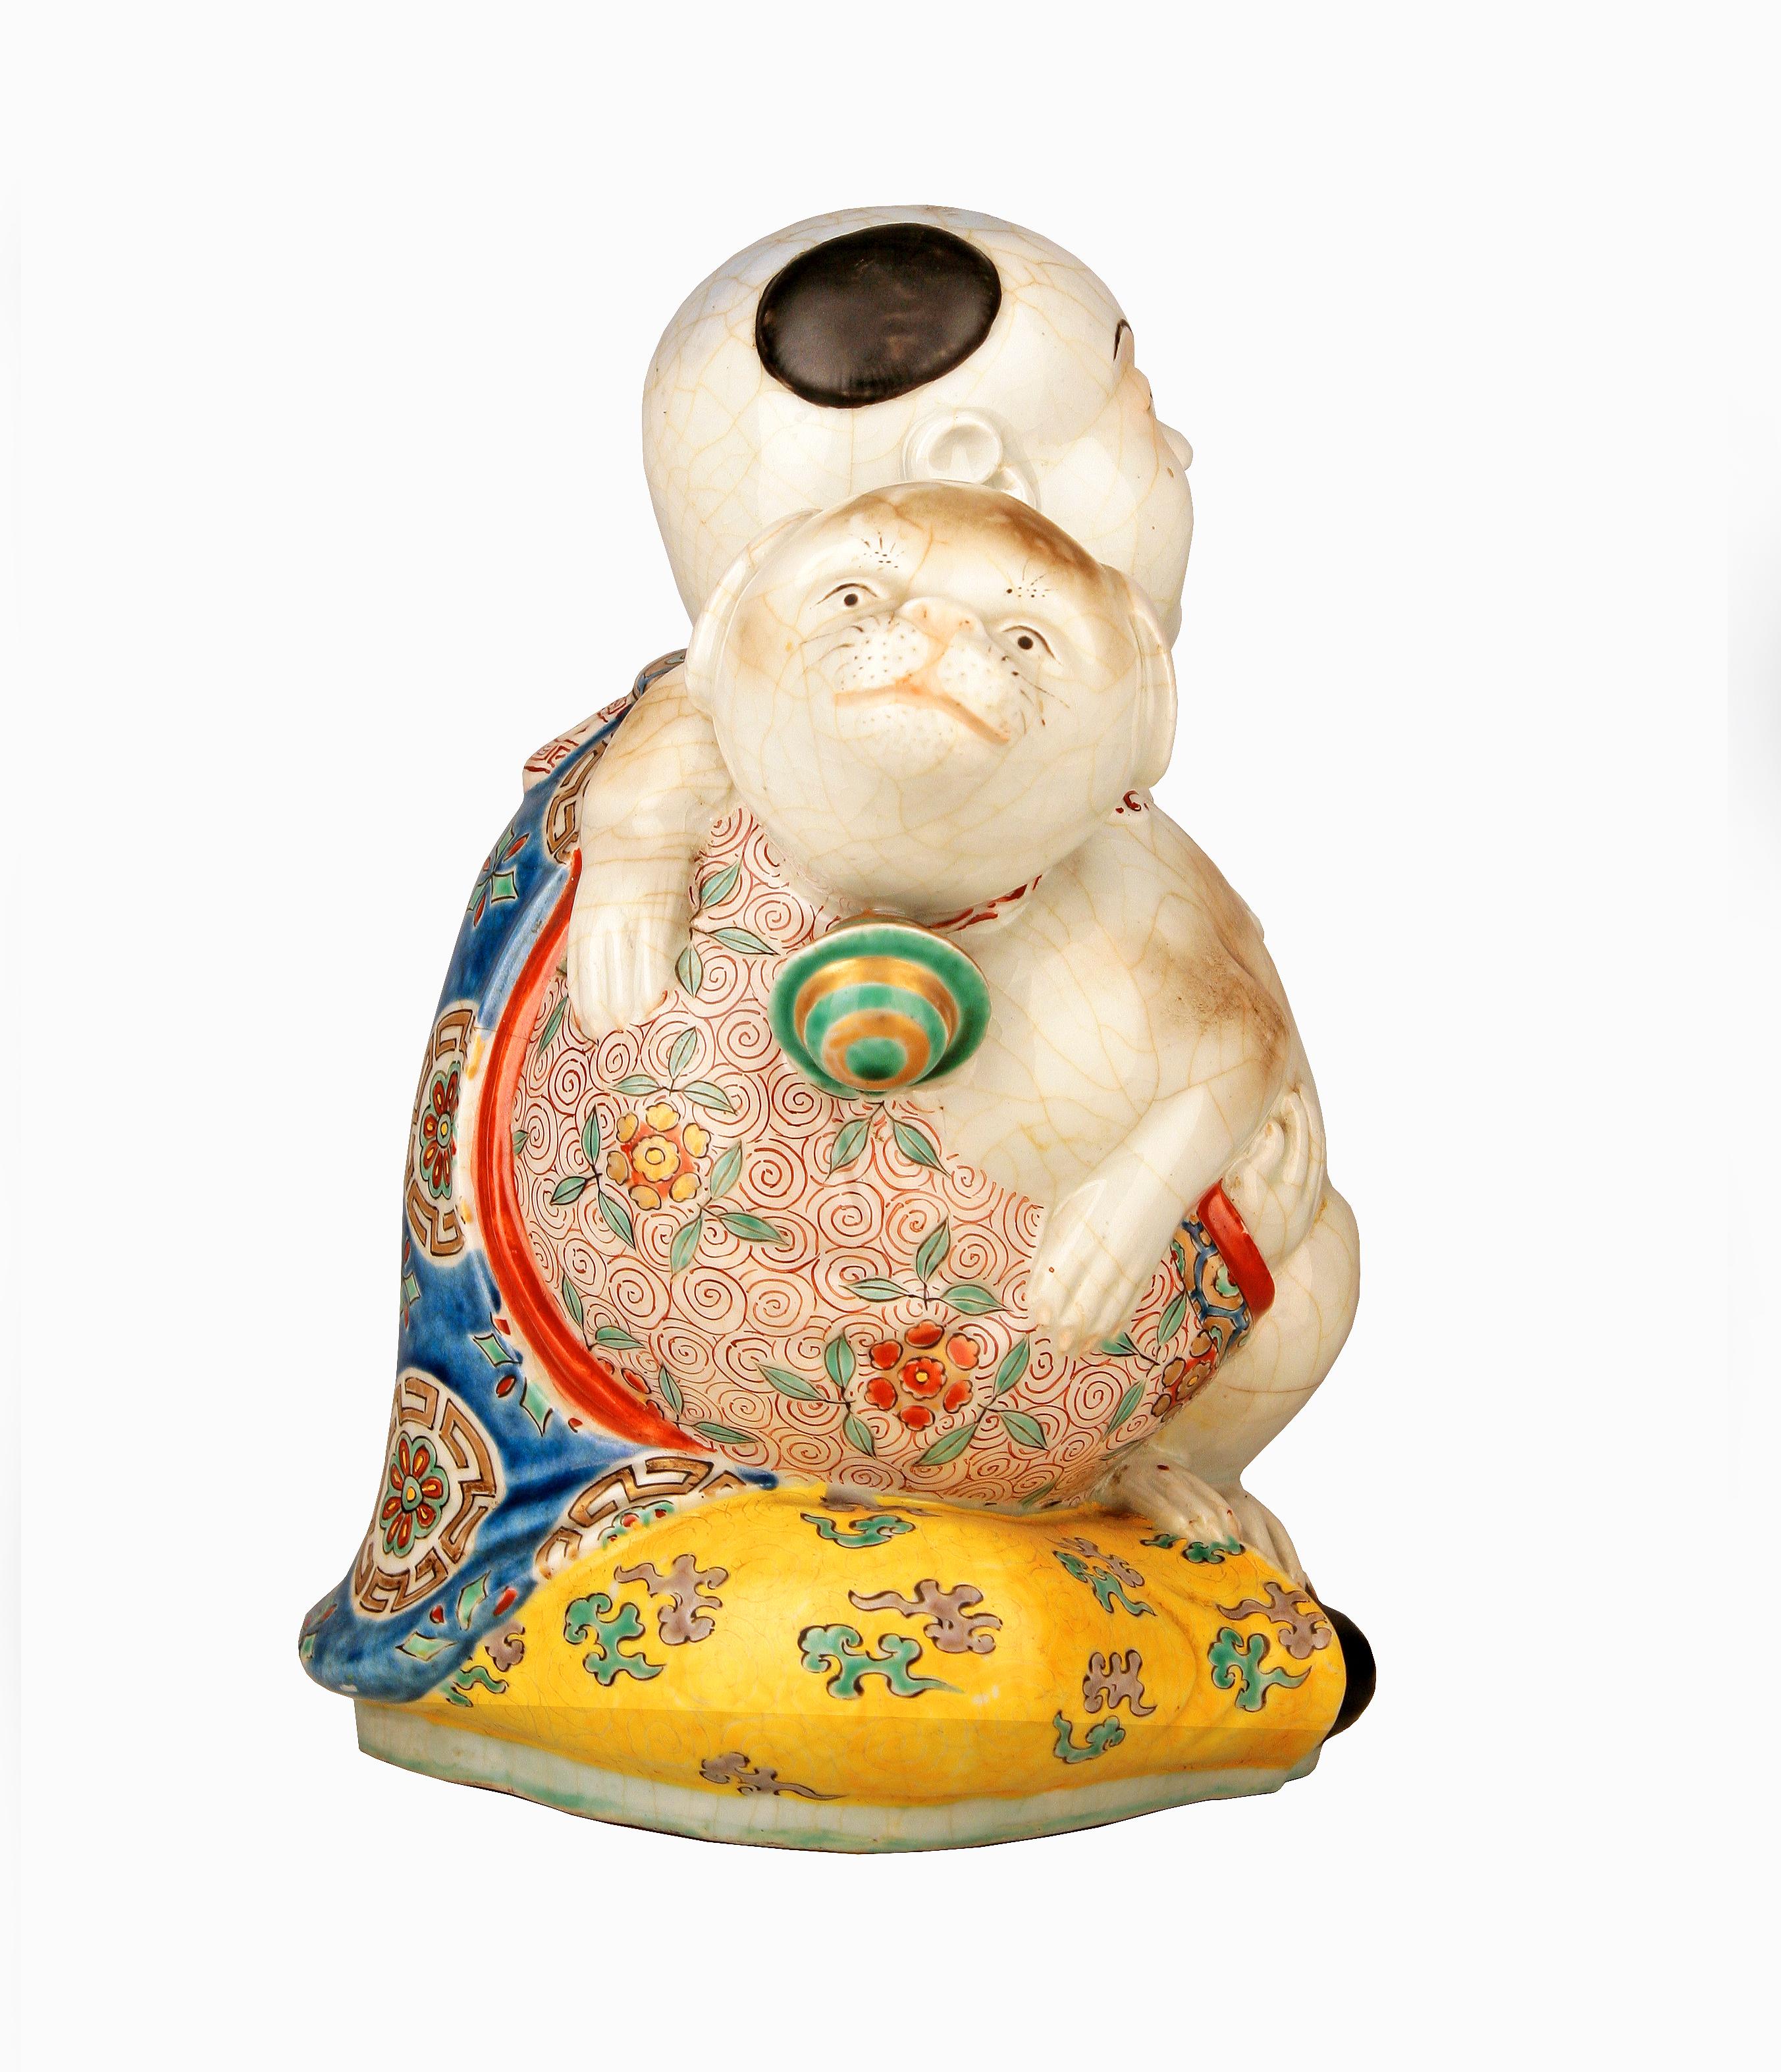 Ceramic 19th Century/Qing Dinasty Glazed Hand-Painted Porcelain Man and Dog Figurine For Sale